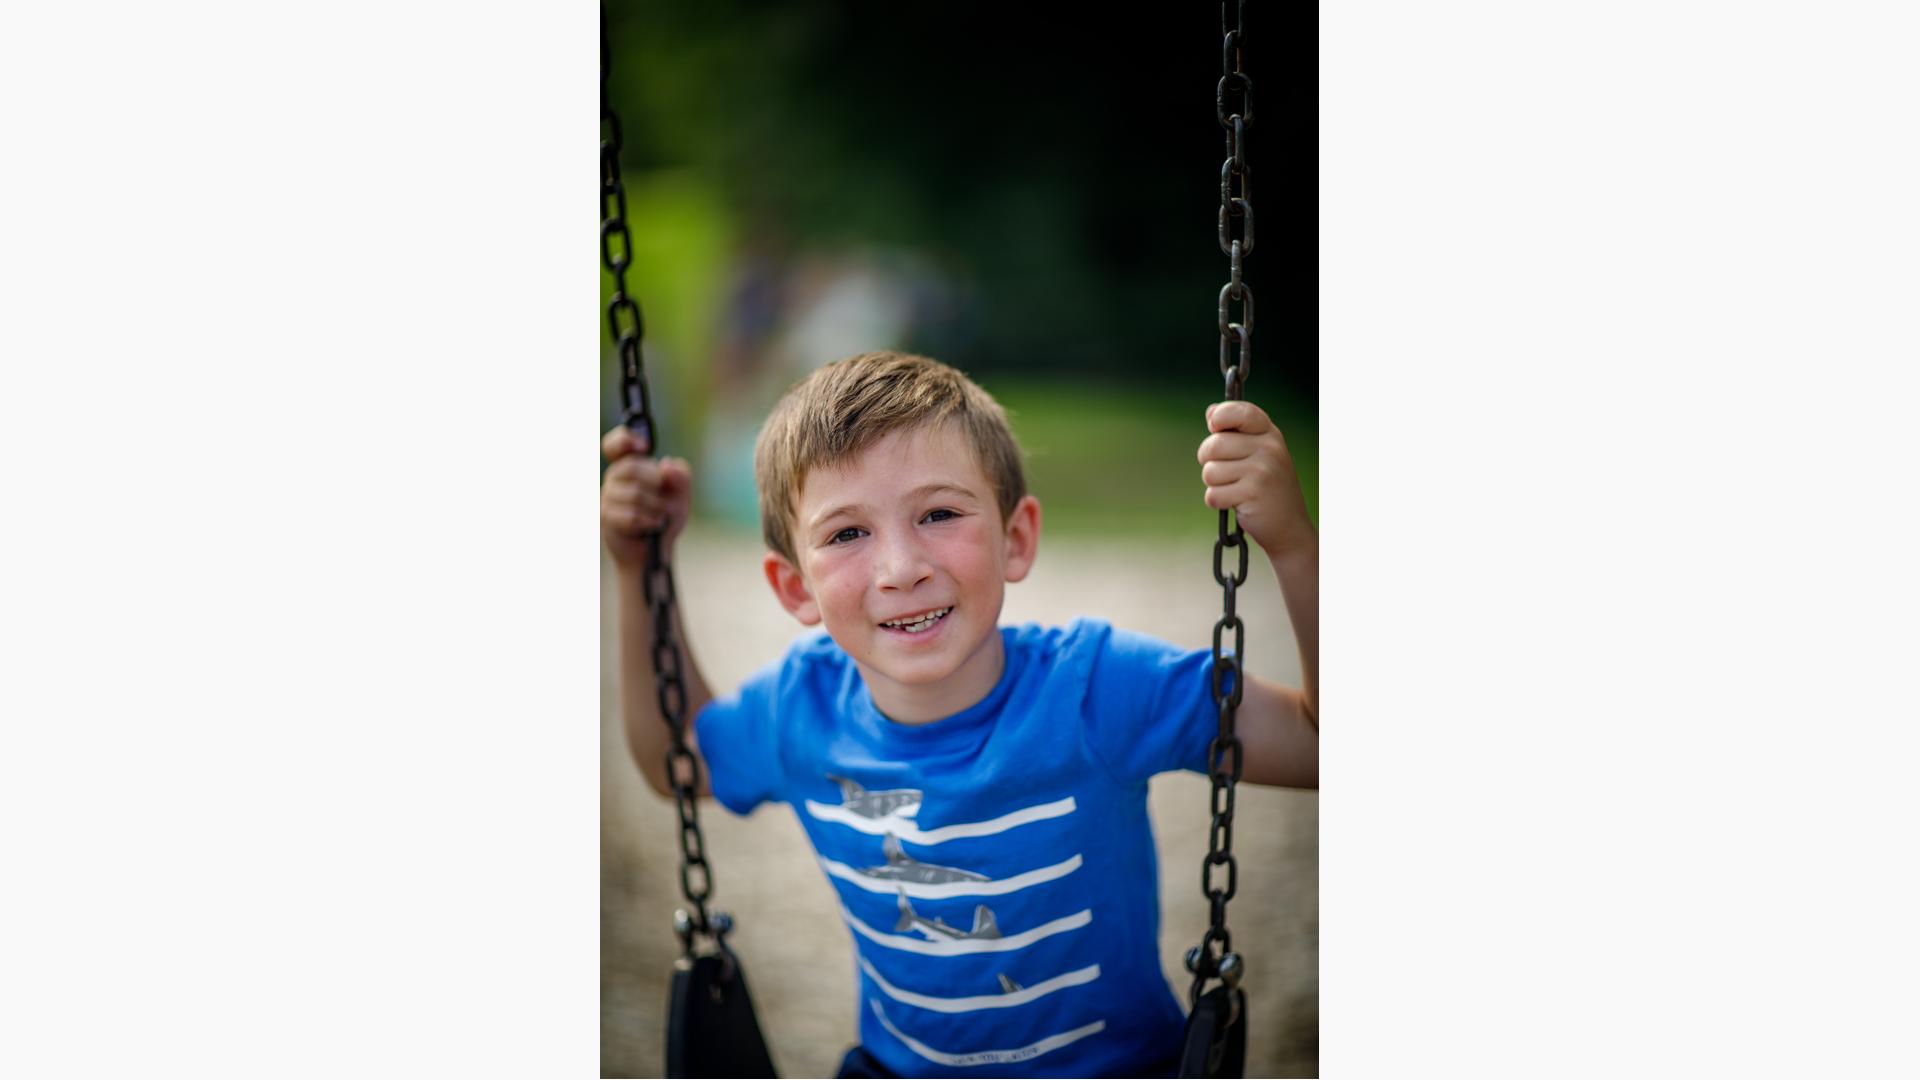 Boy in blue shirt smiles as he sits on swing